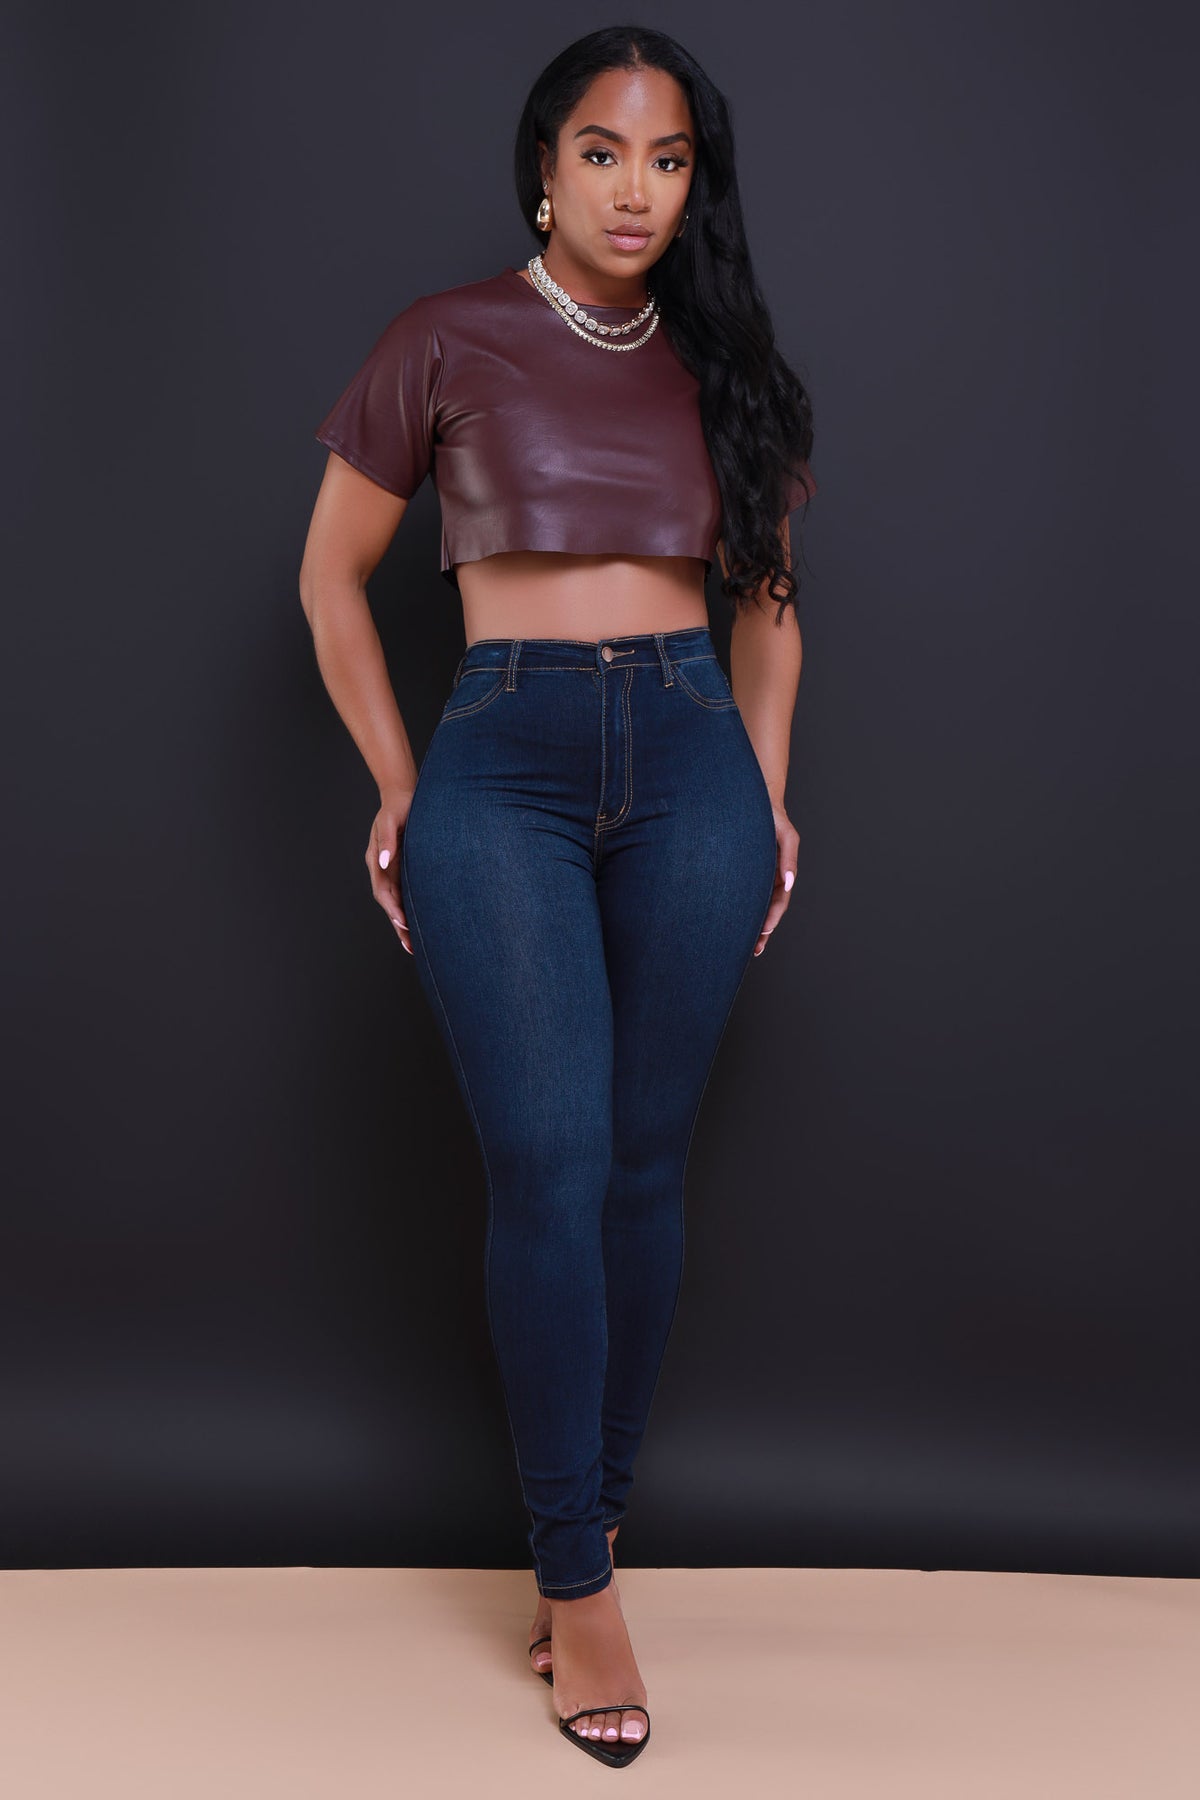 
              Act Grown Faux Leather Crop Top - Burgundy - Swank A Posh
            